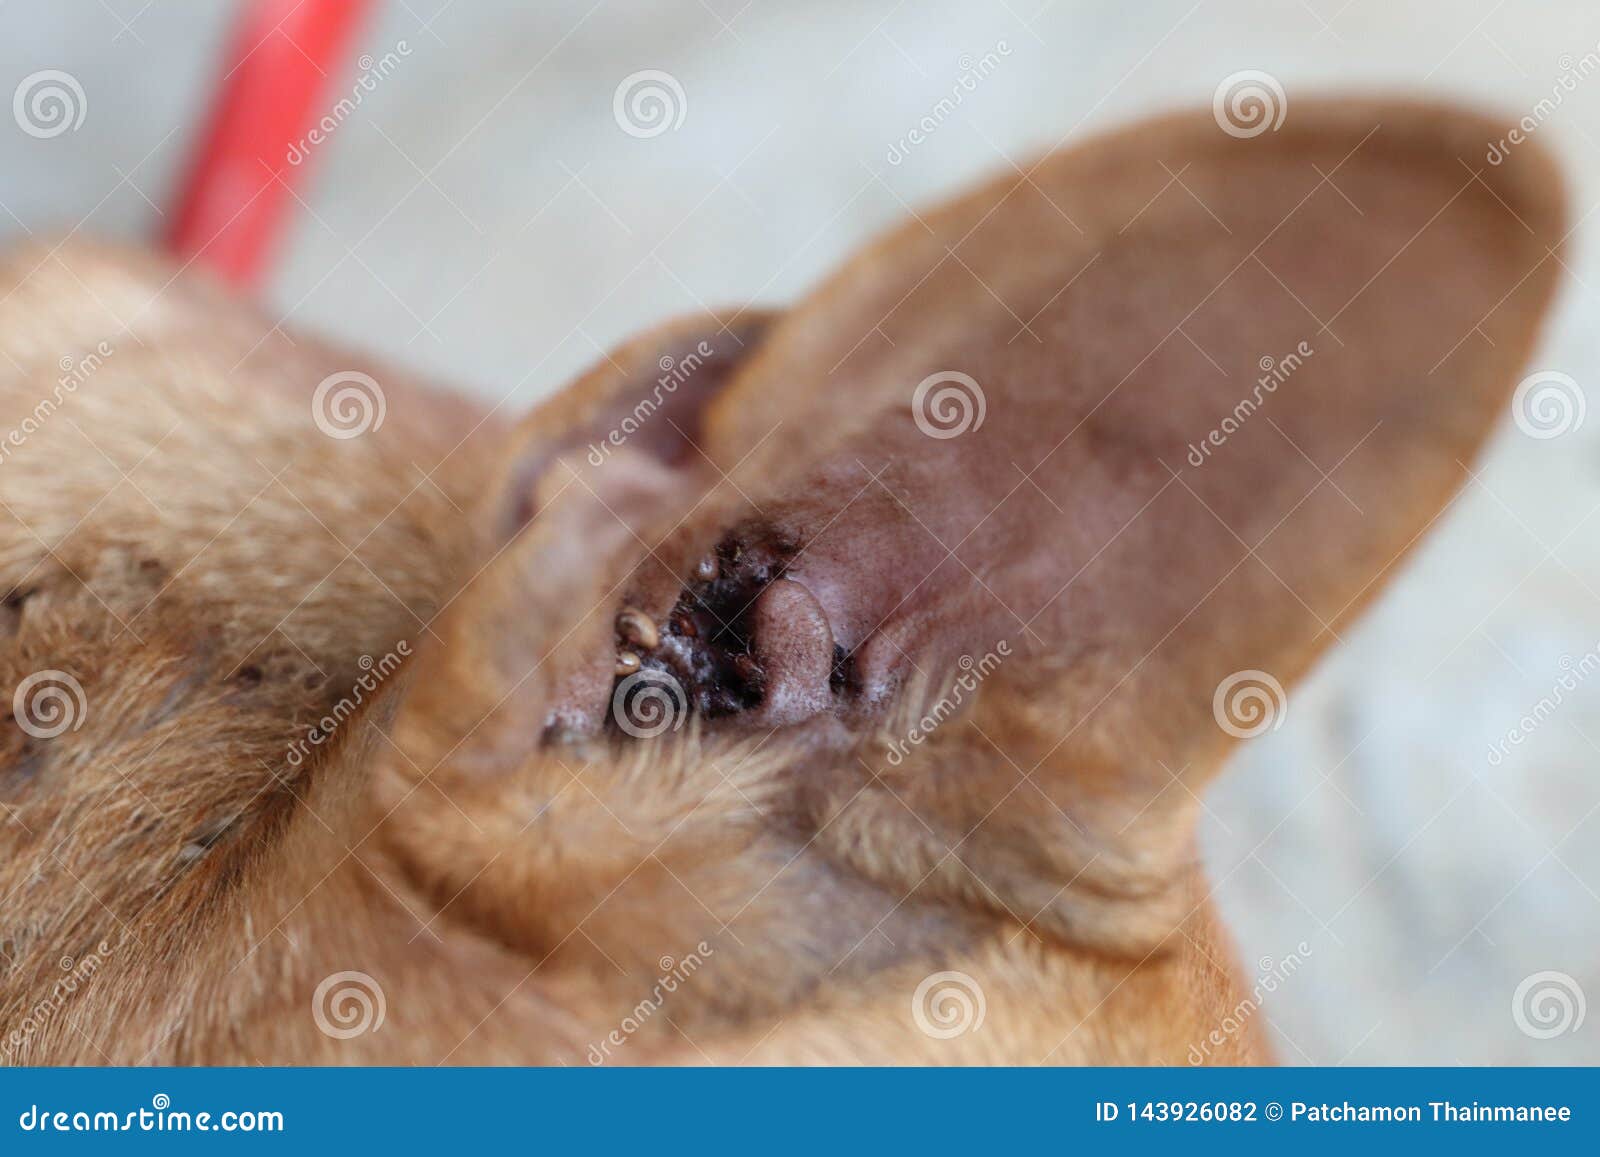 Close Up A Lot Of Ticks In The Dog X27 S Ears To Eat Blood Stock Photo Image Of Close Blood 143926082,Argentinian Food